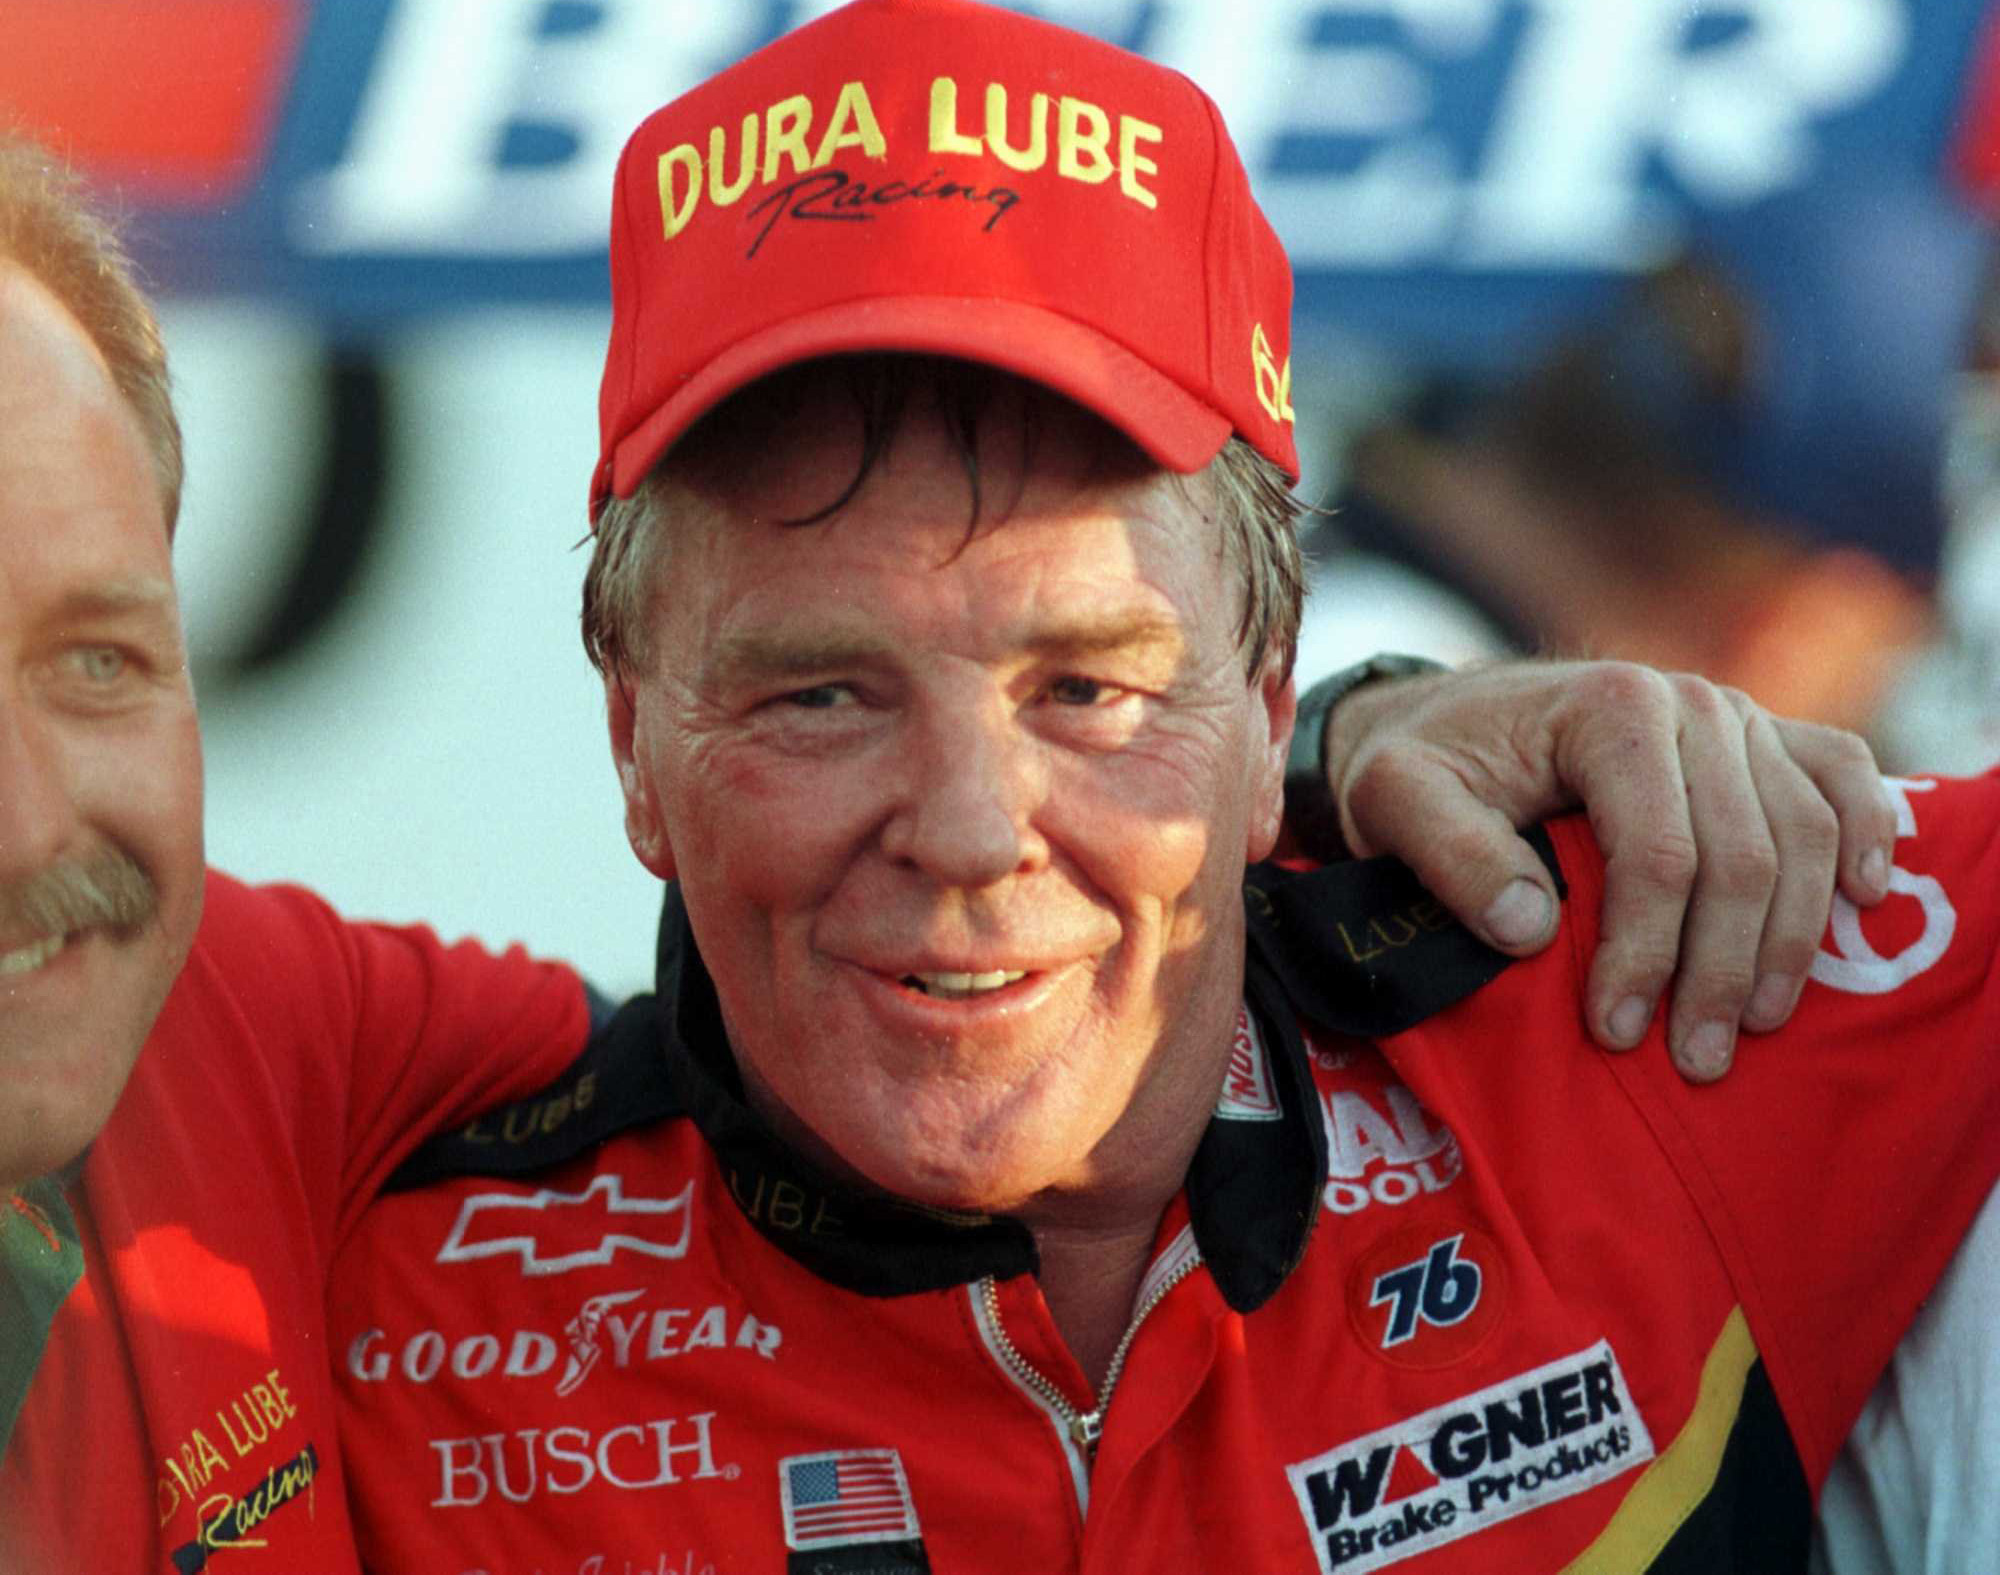 NASCAR’s Dick Trickle Tragically Took His Own Life After Years of Pain